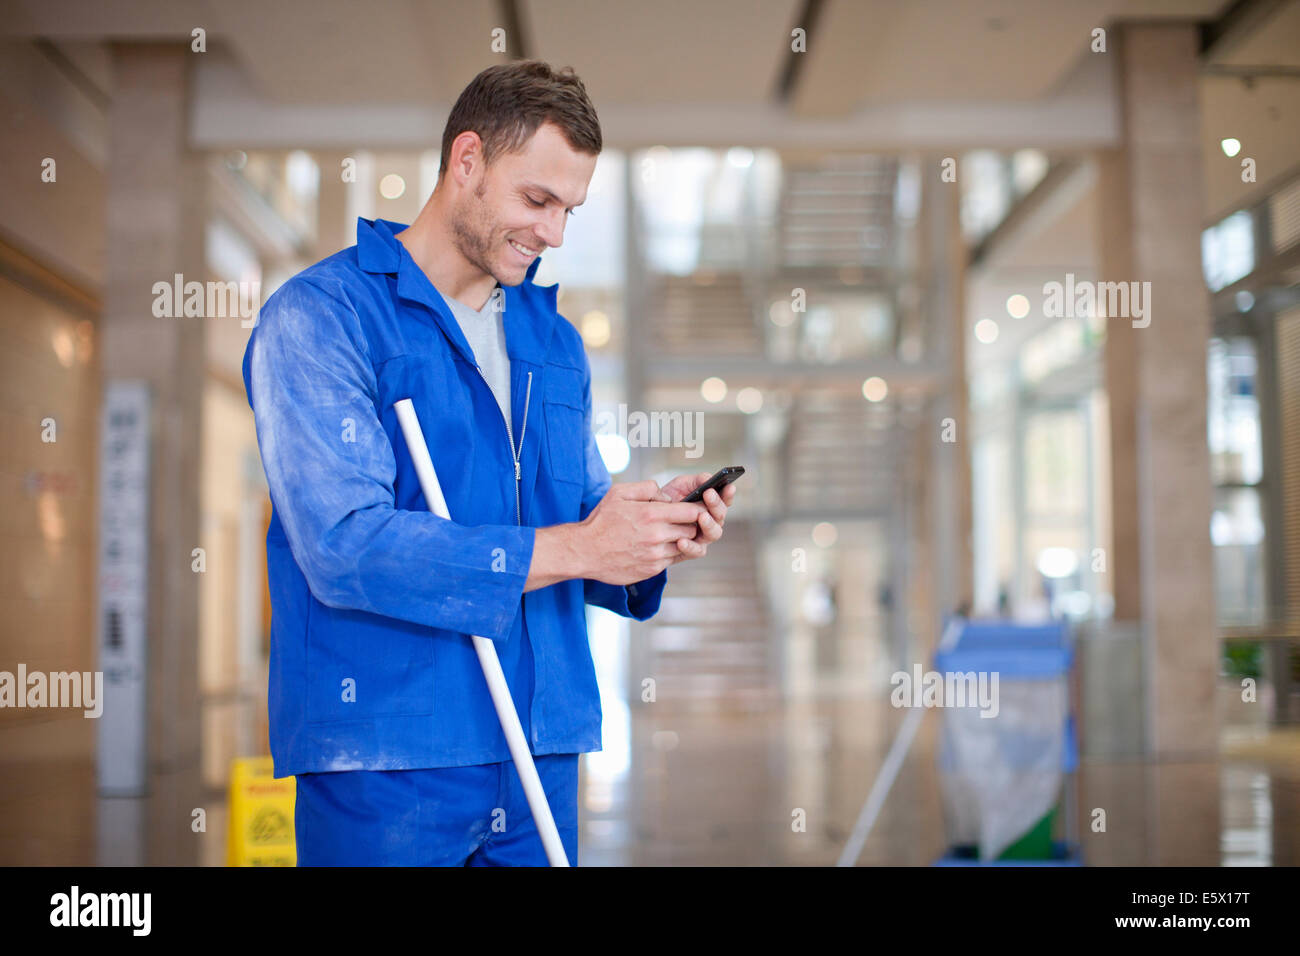 Male cleaner texting on smartphone in office atrium Stock Photo